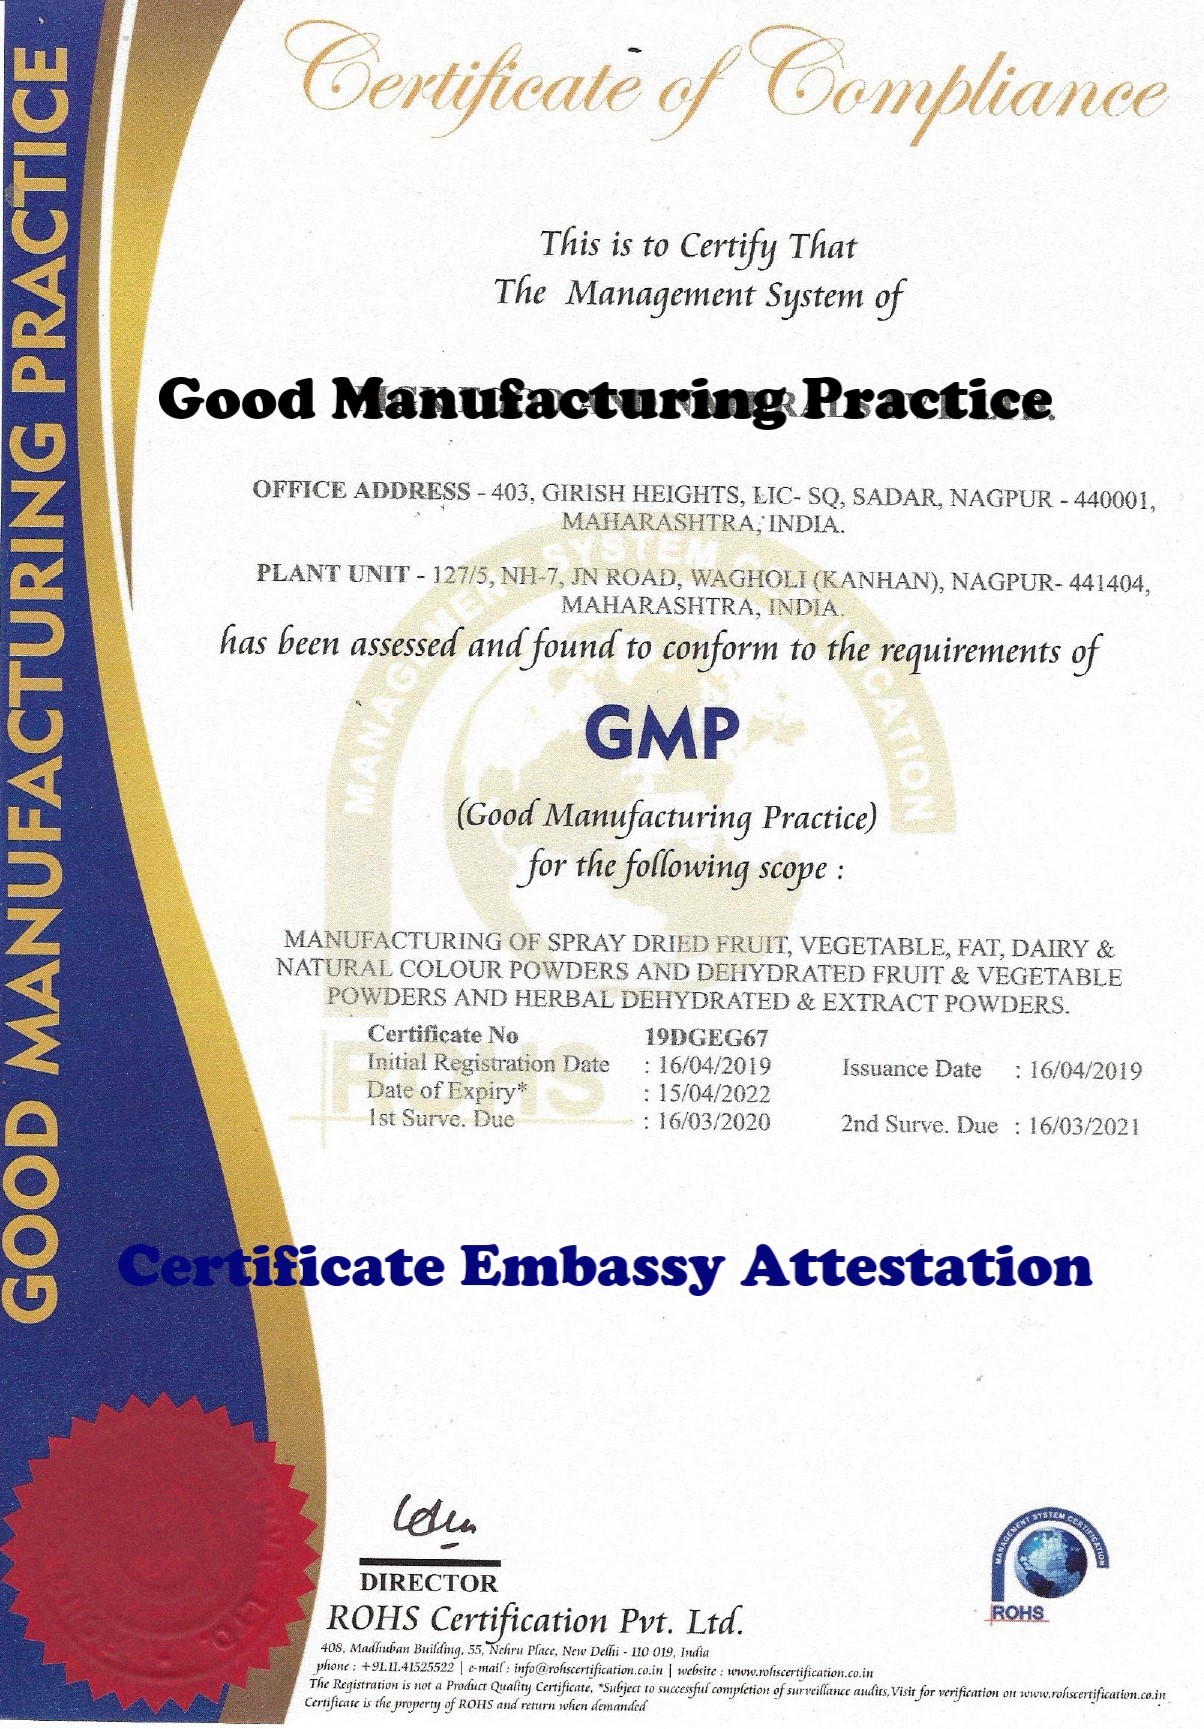 GMP Certificate Attestation from Netherlands Embassy